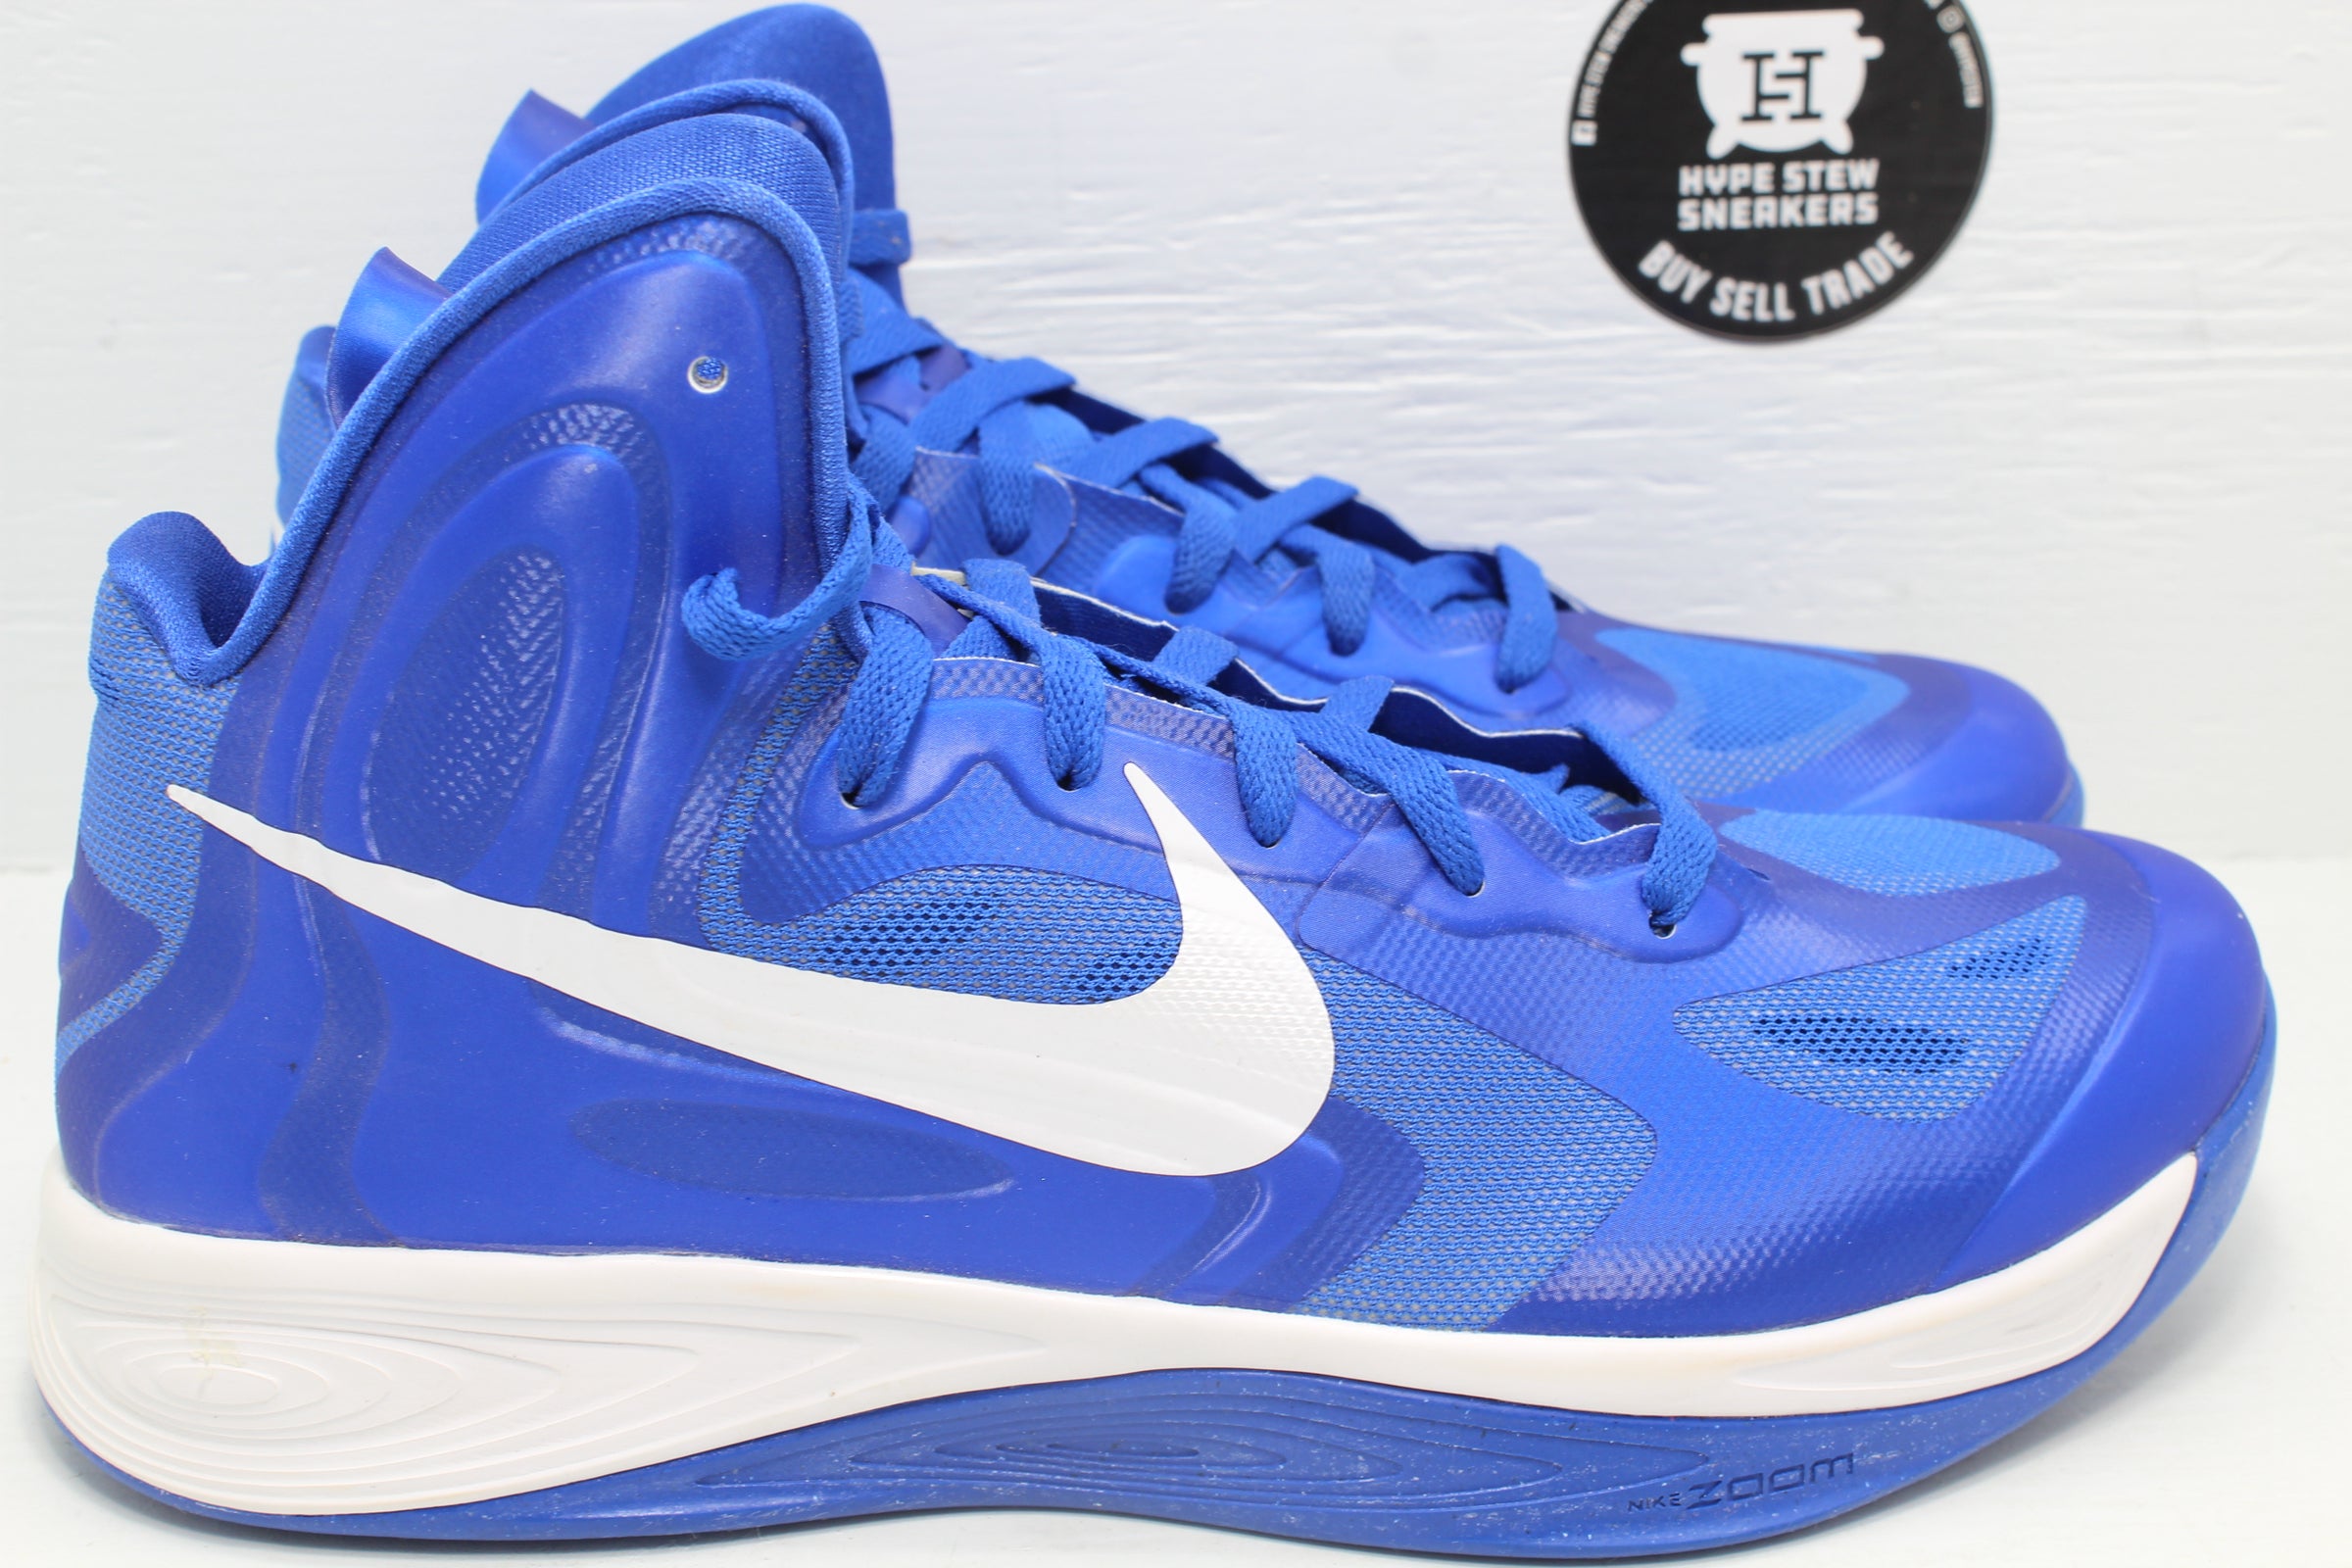 Nike Zoom Hyperfuse 2012 Game Royal Hype Stew Sneakers Detroit